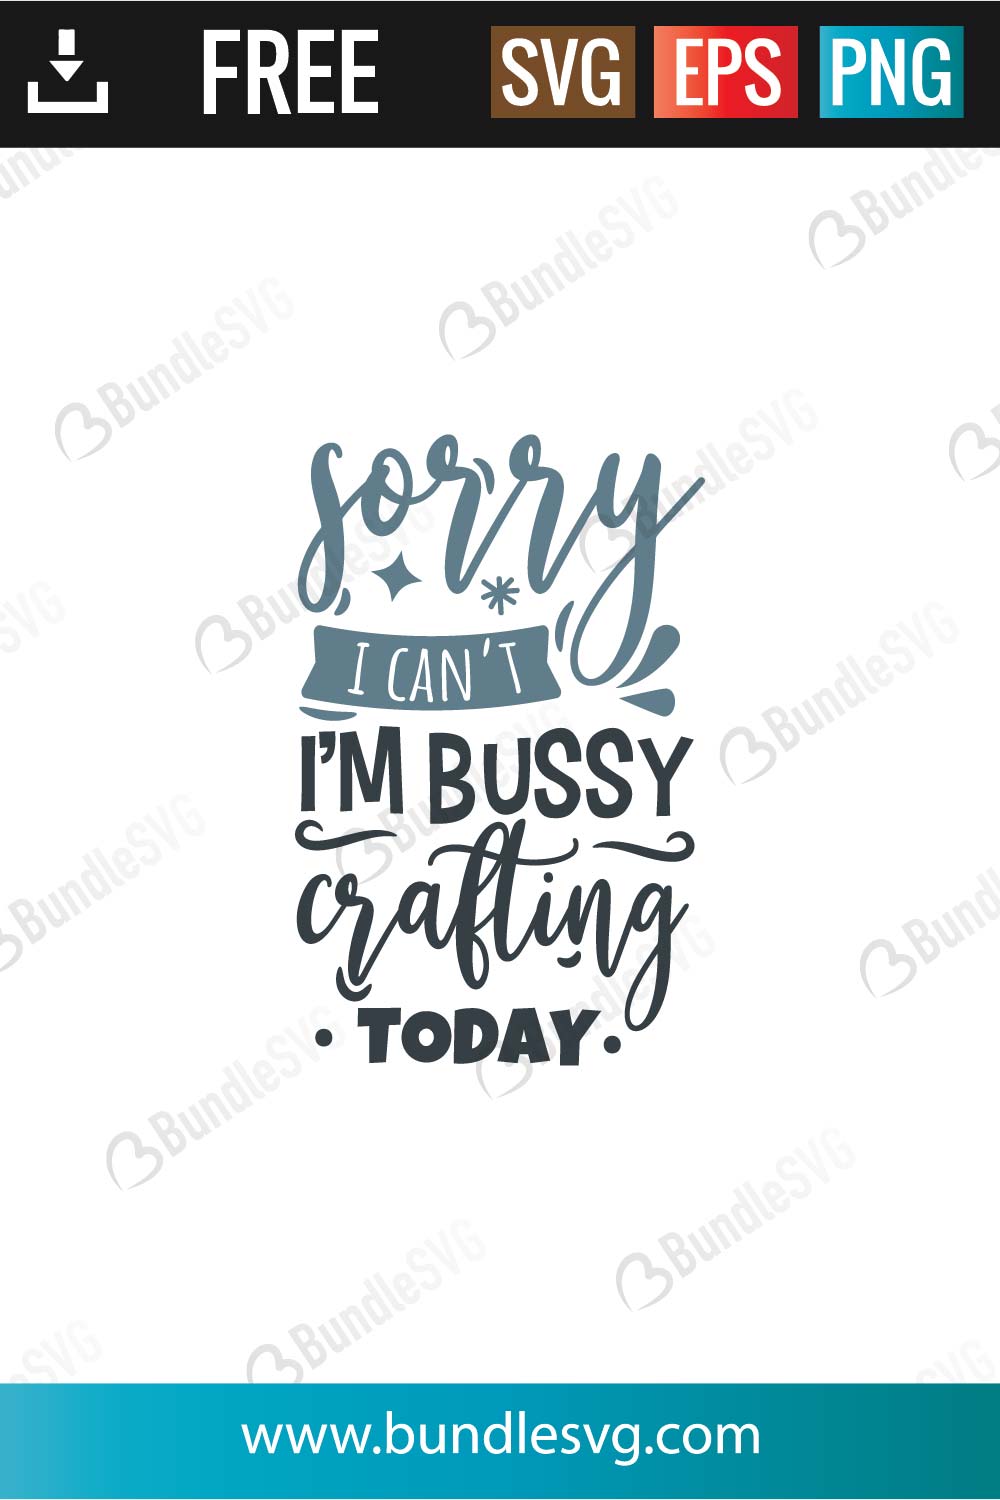 Sorry I Can’t I’m Bussy Crafting Today SVG Cut Files Free Download ...